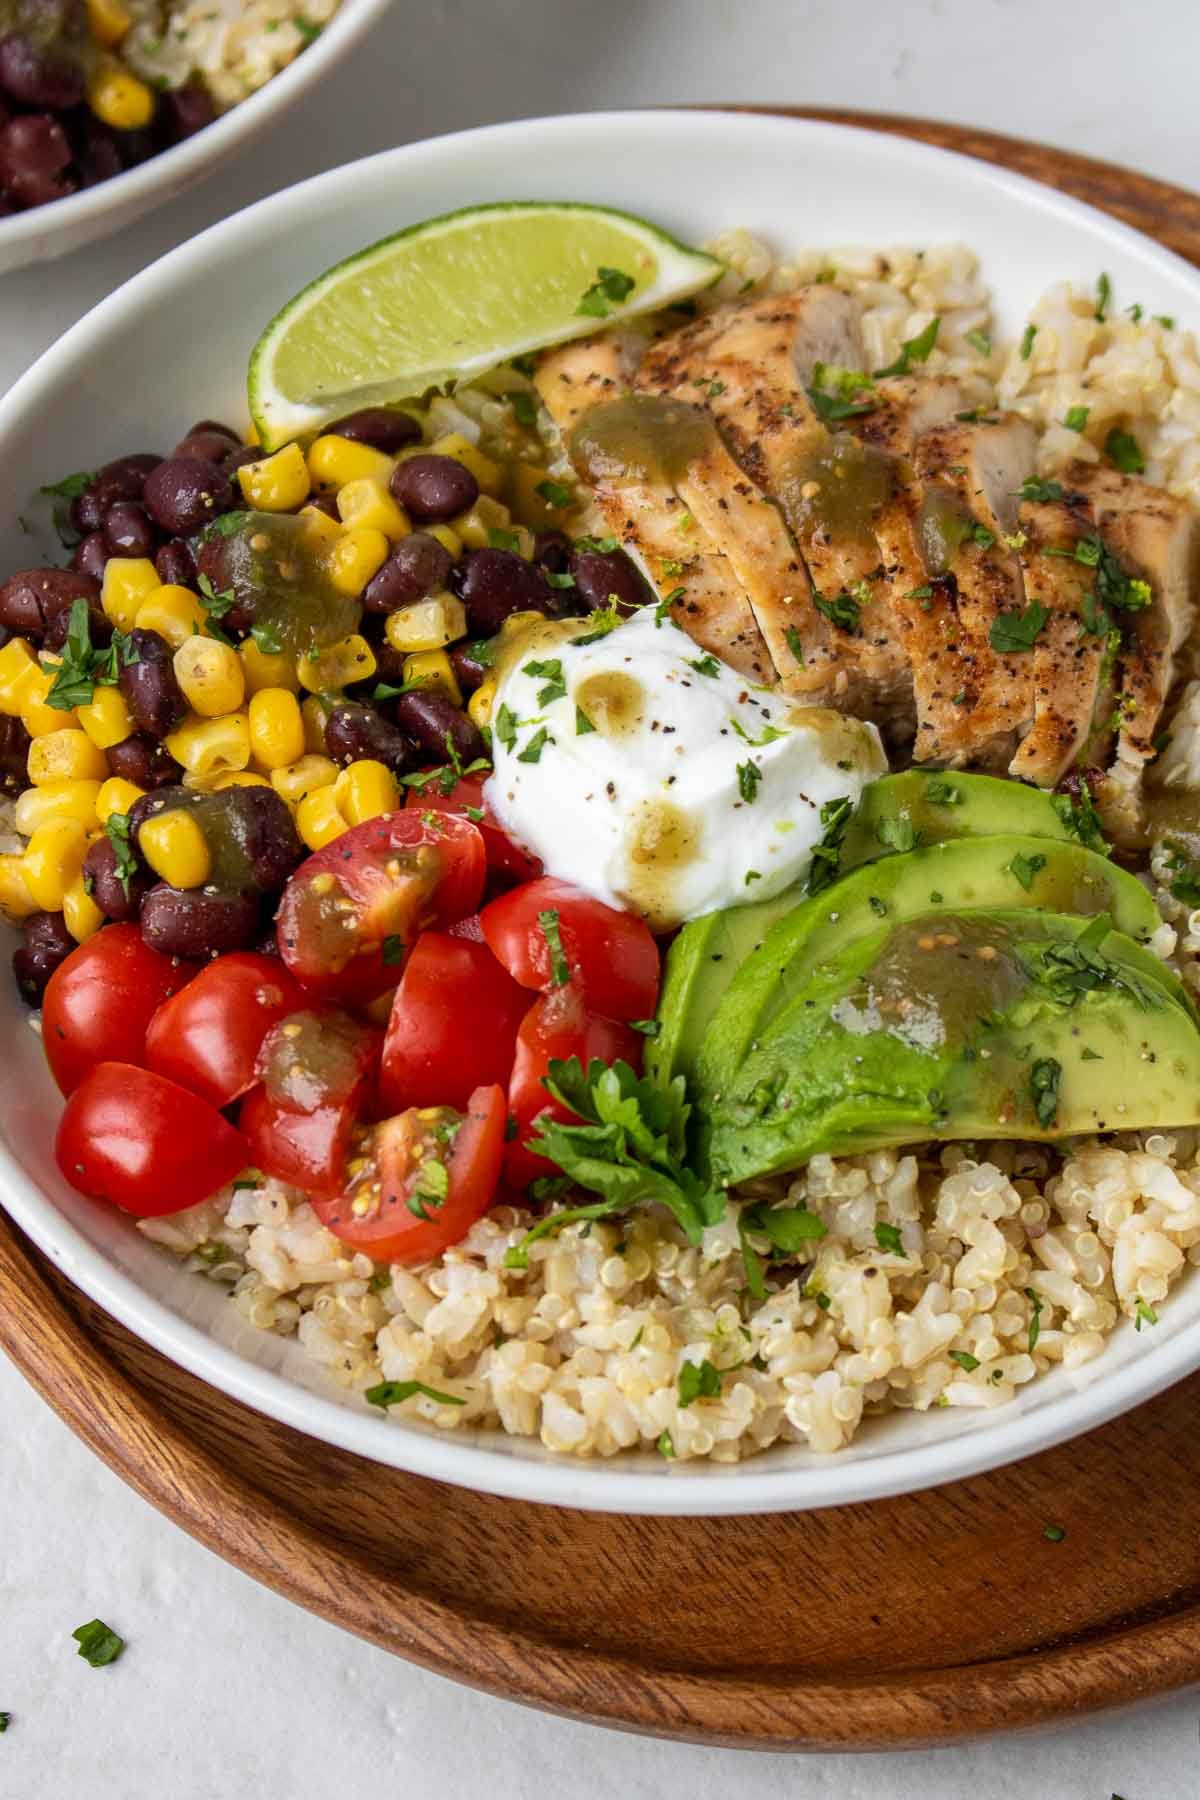 Overhead view of bowl with grains, grilled chicken, black bean and corn salsa, cherry tomatoes, avocado, Greek yogurt, salsa verde, and fresh cilantro.